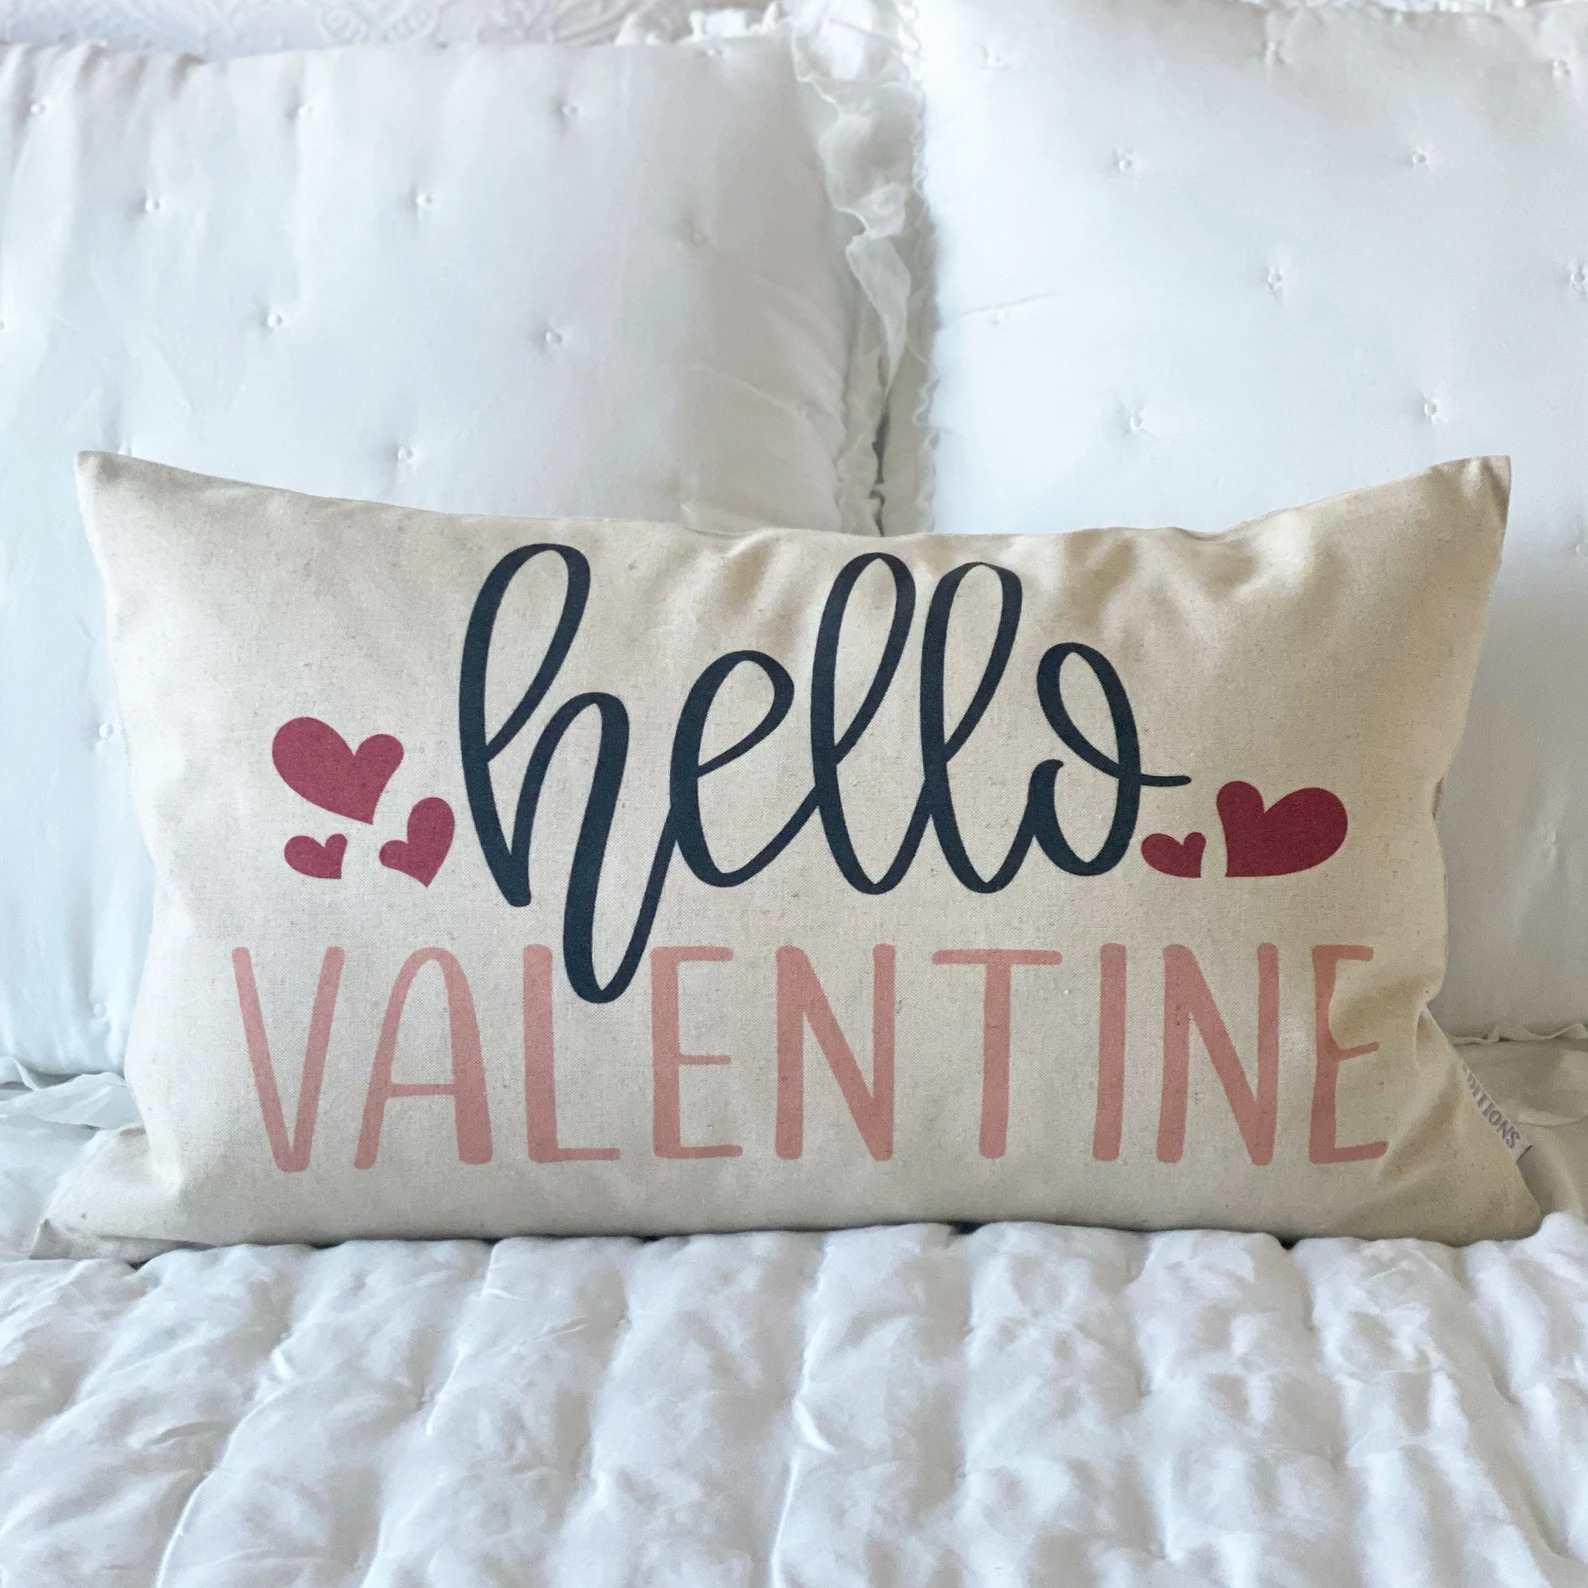 17 Ravishing Valentine's Day Pillow Designs That Will Bring Love To Any Space